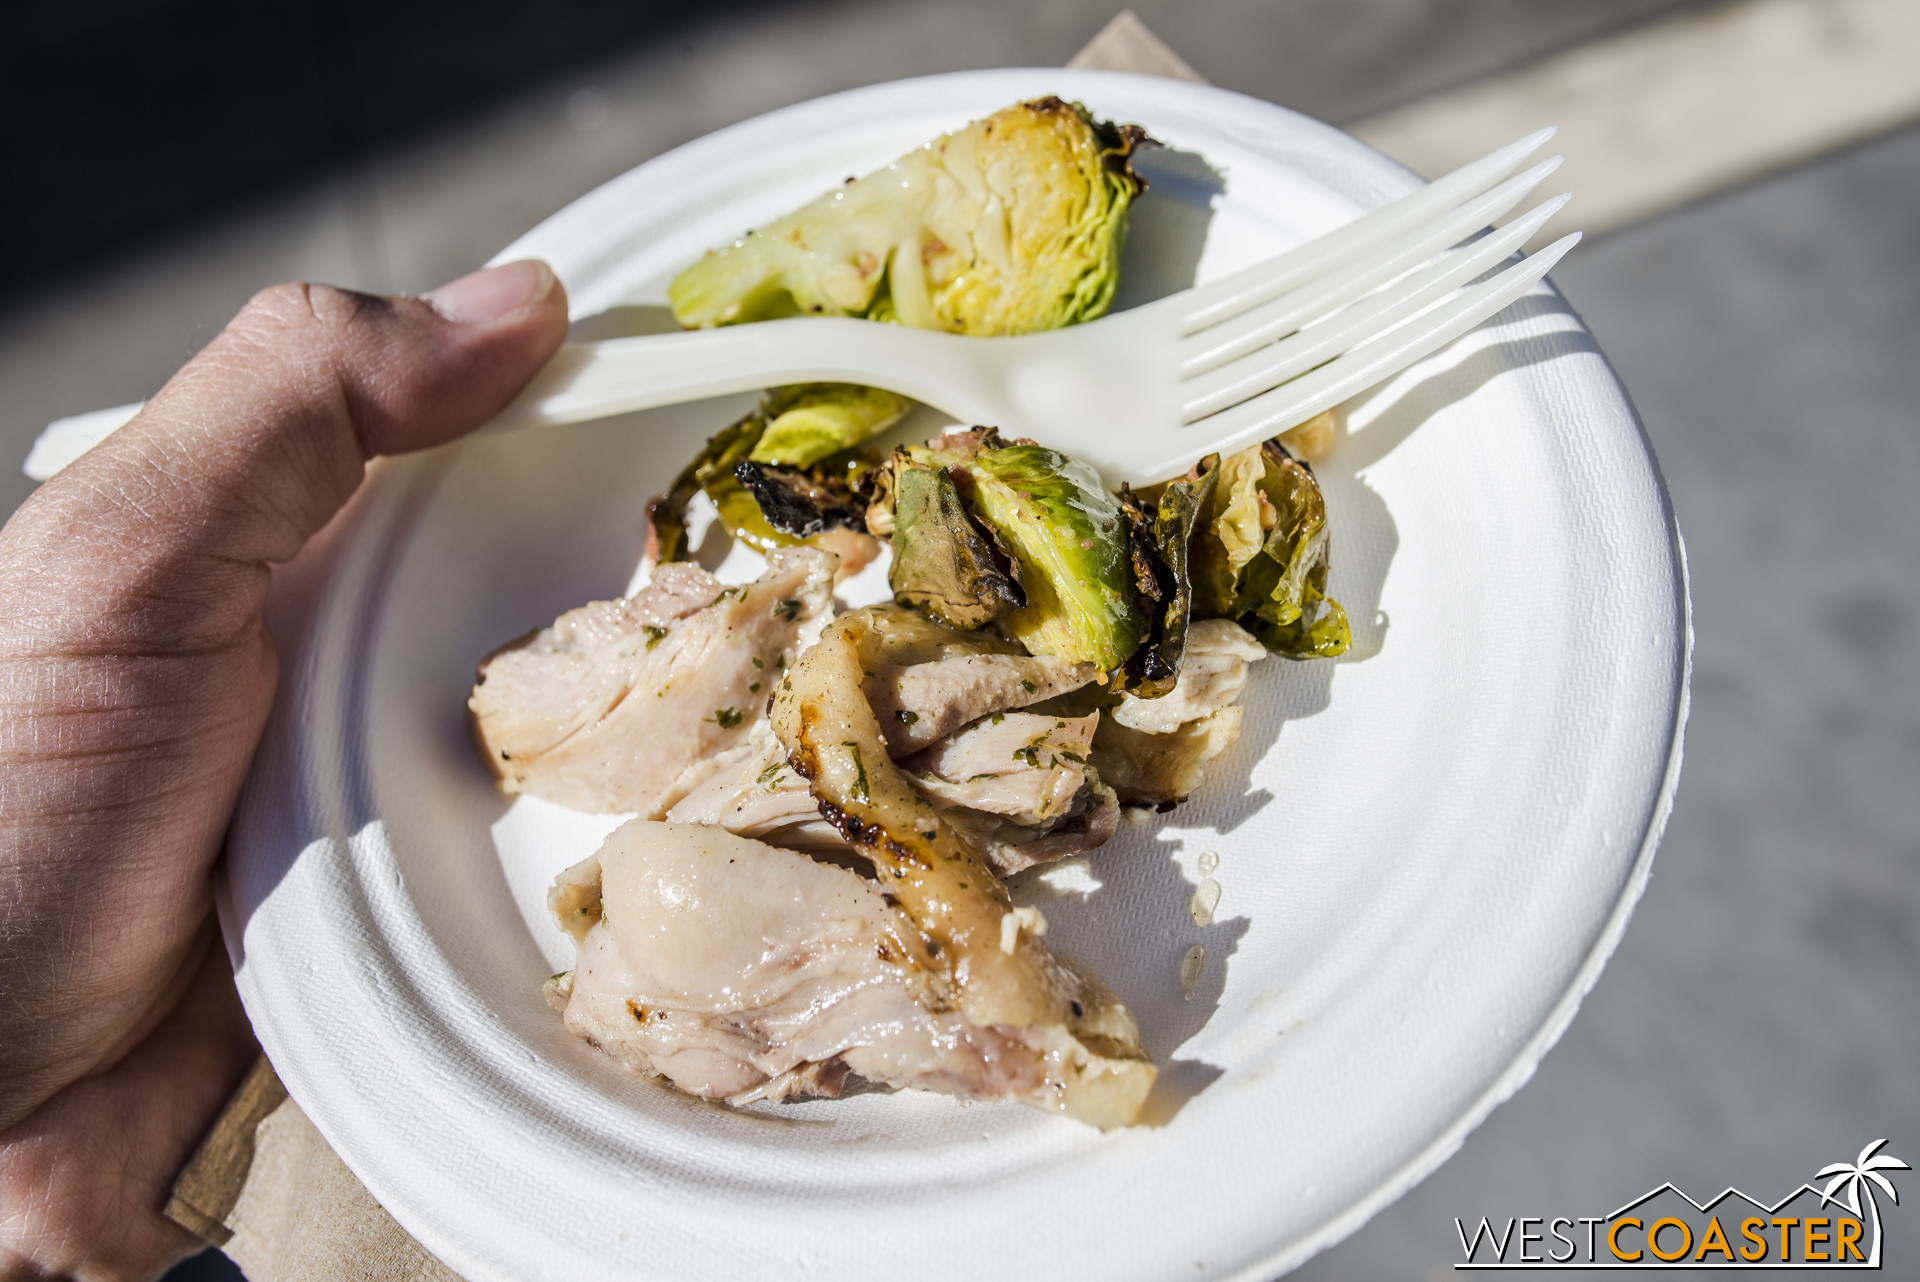  Roasted chicken and roasted brussels sprouts.&nbsp; They were pretty tasty! 